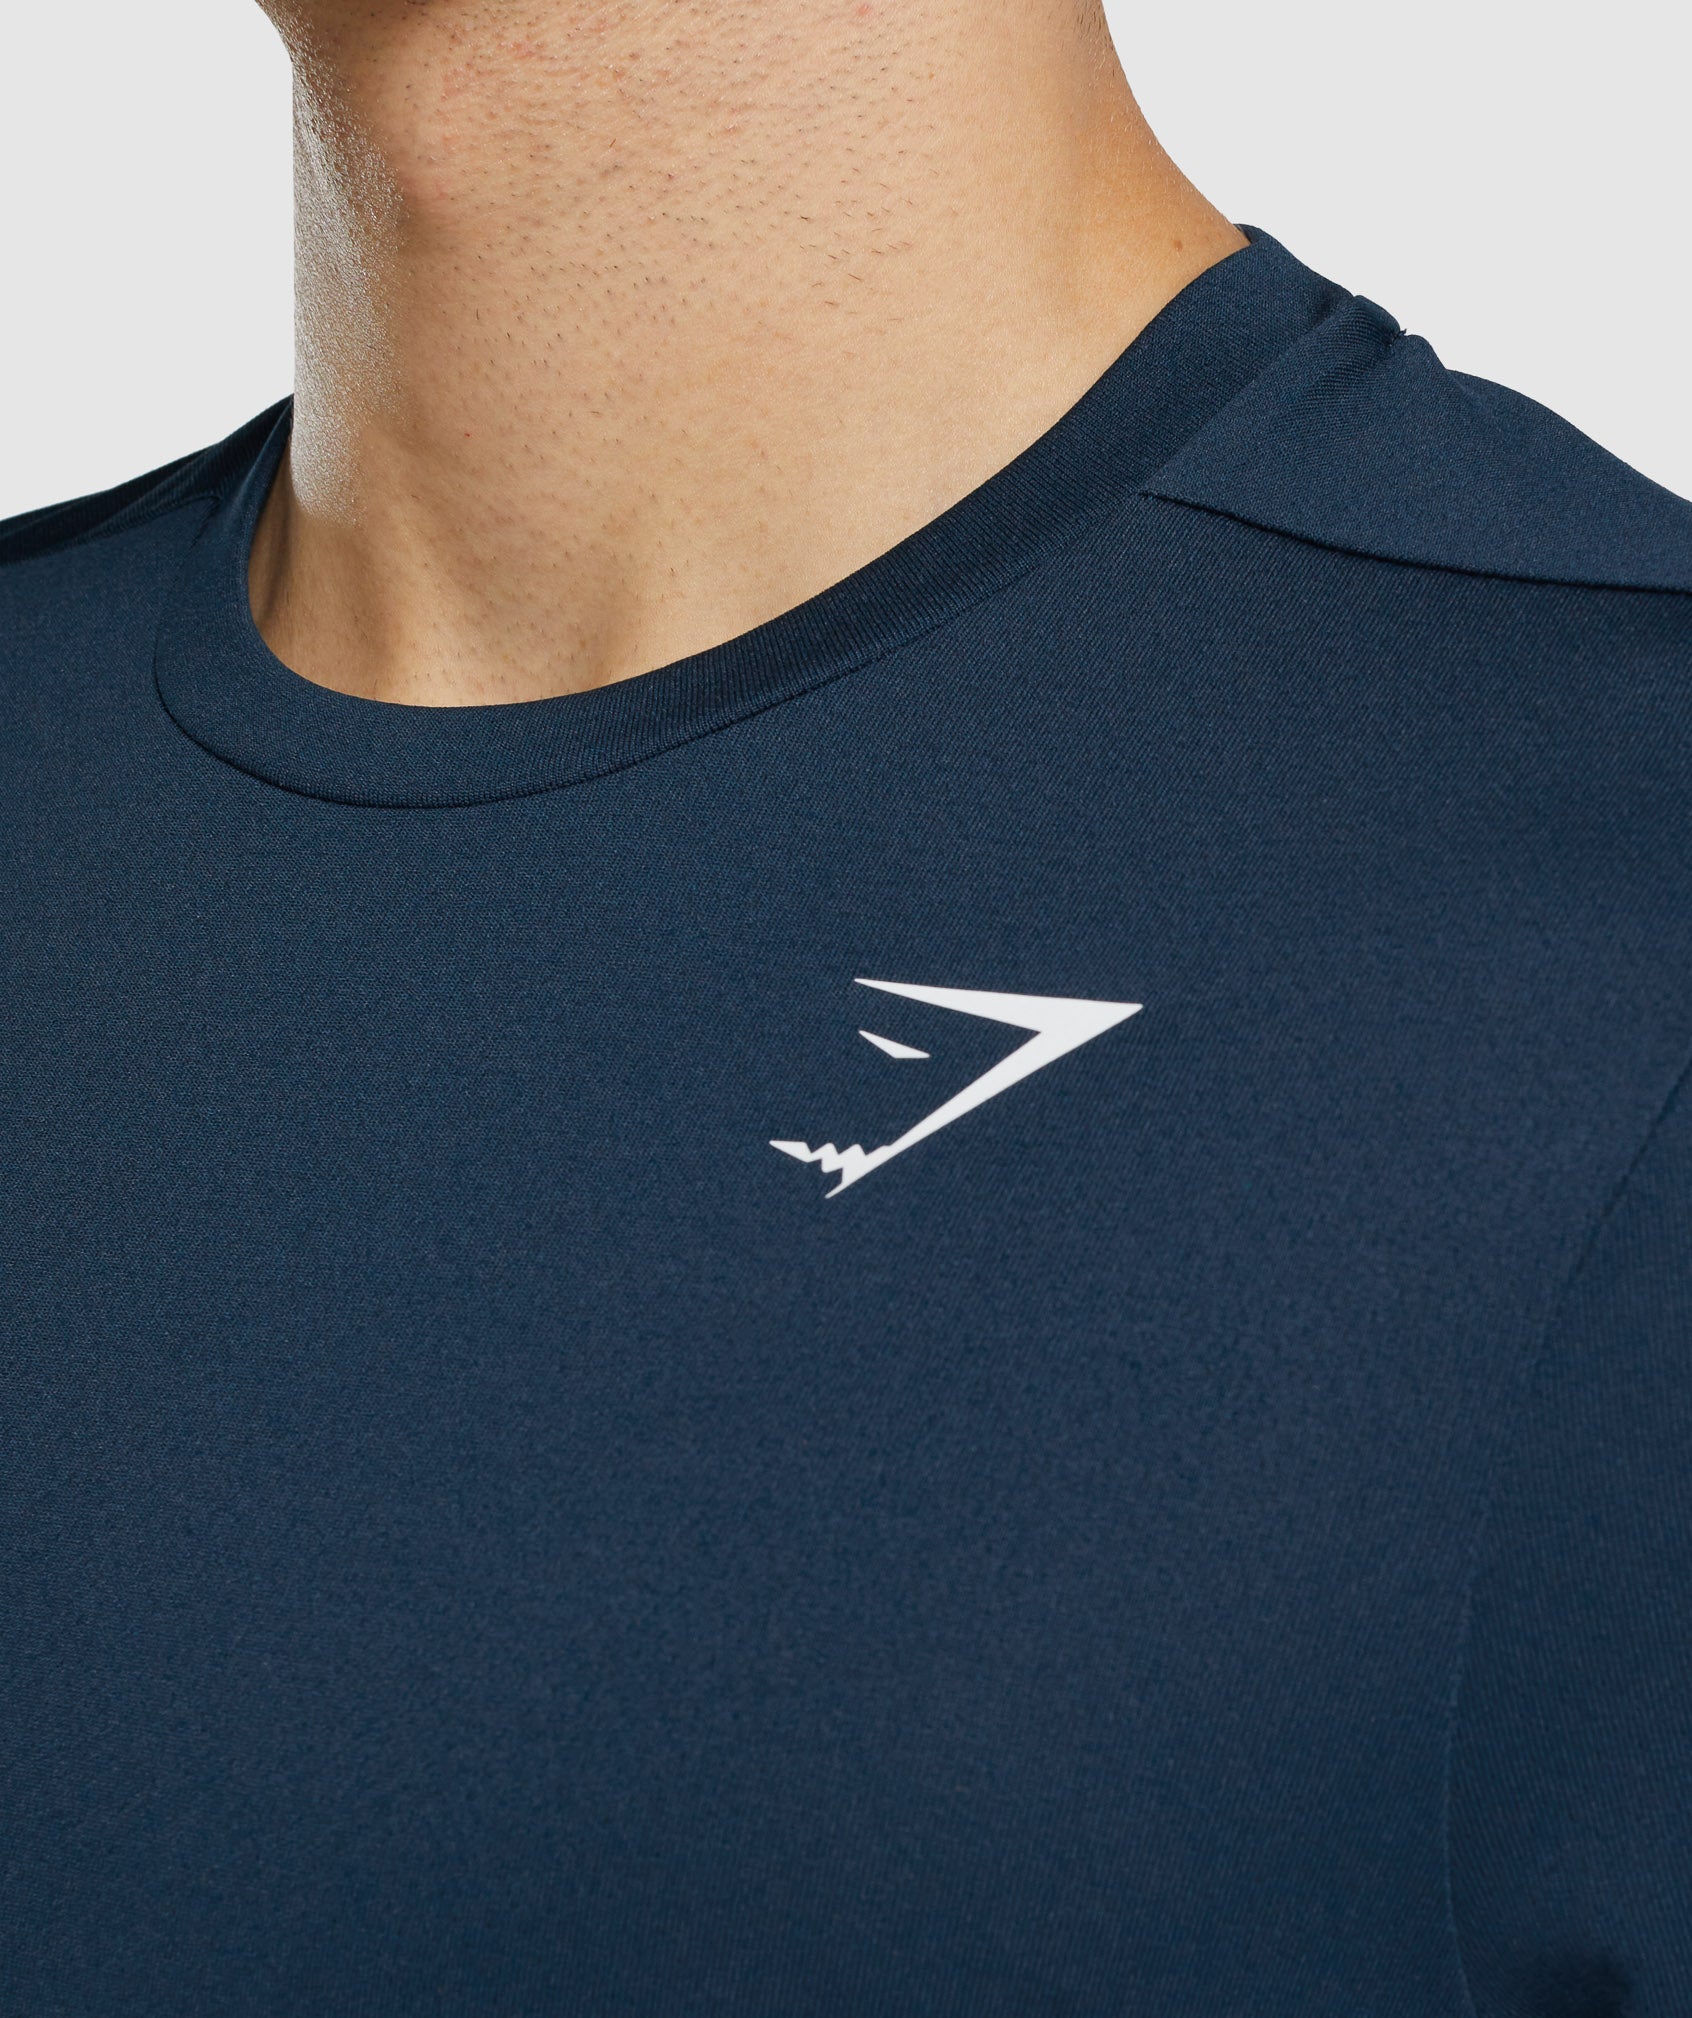 Arrival Regular Fit T-Shirt in Navy - view 6